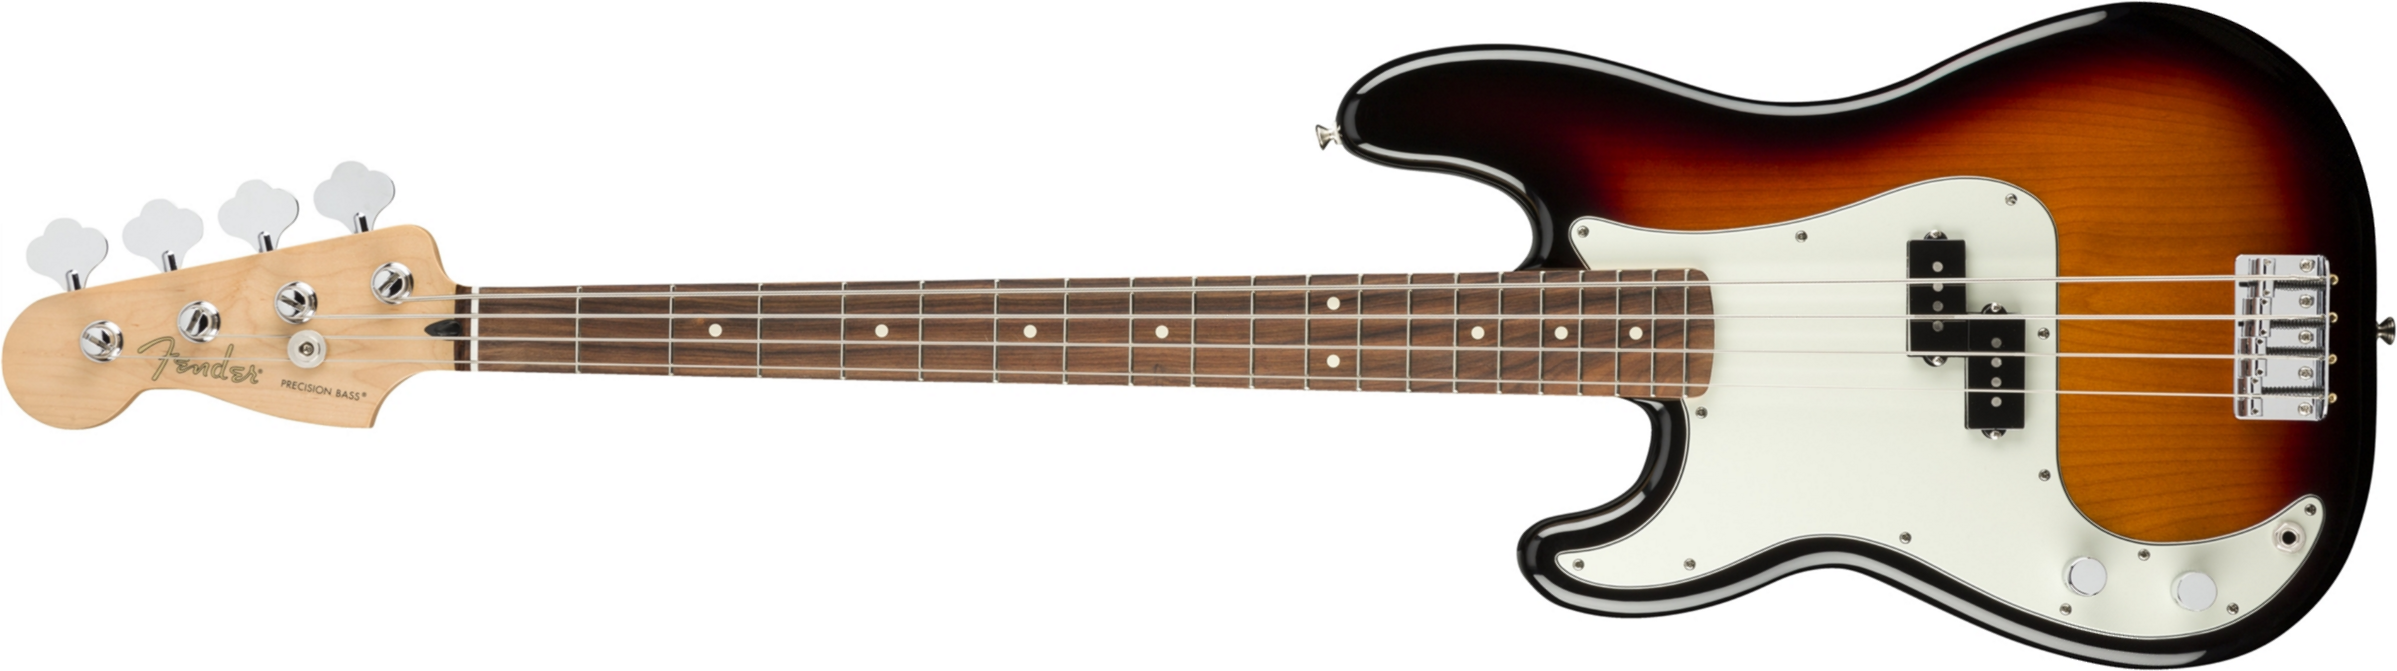 Fender Precision Bass Player Lh Gaucher Mex Pf - 3-color Sunburst - Solid body electric bass - Main picture